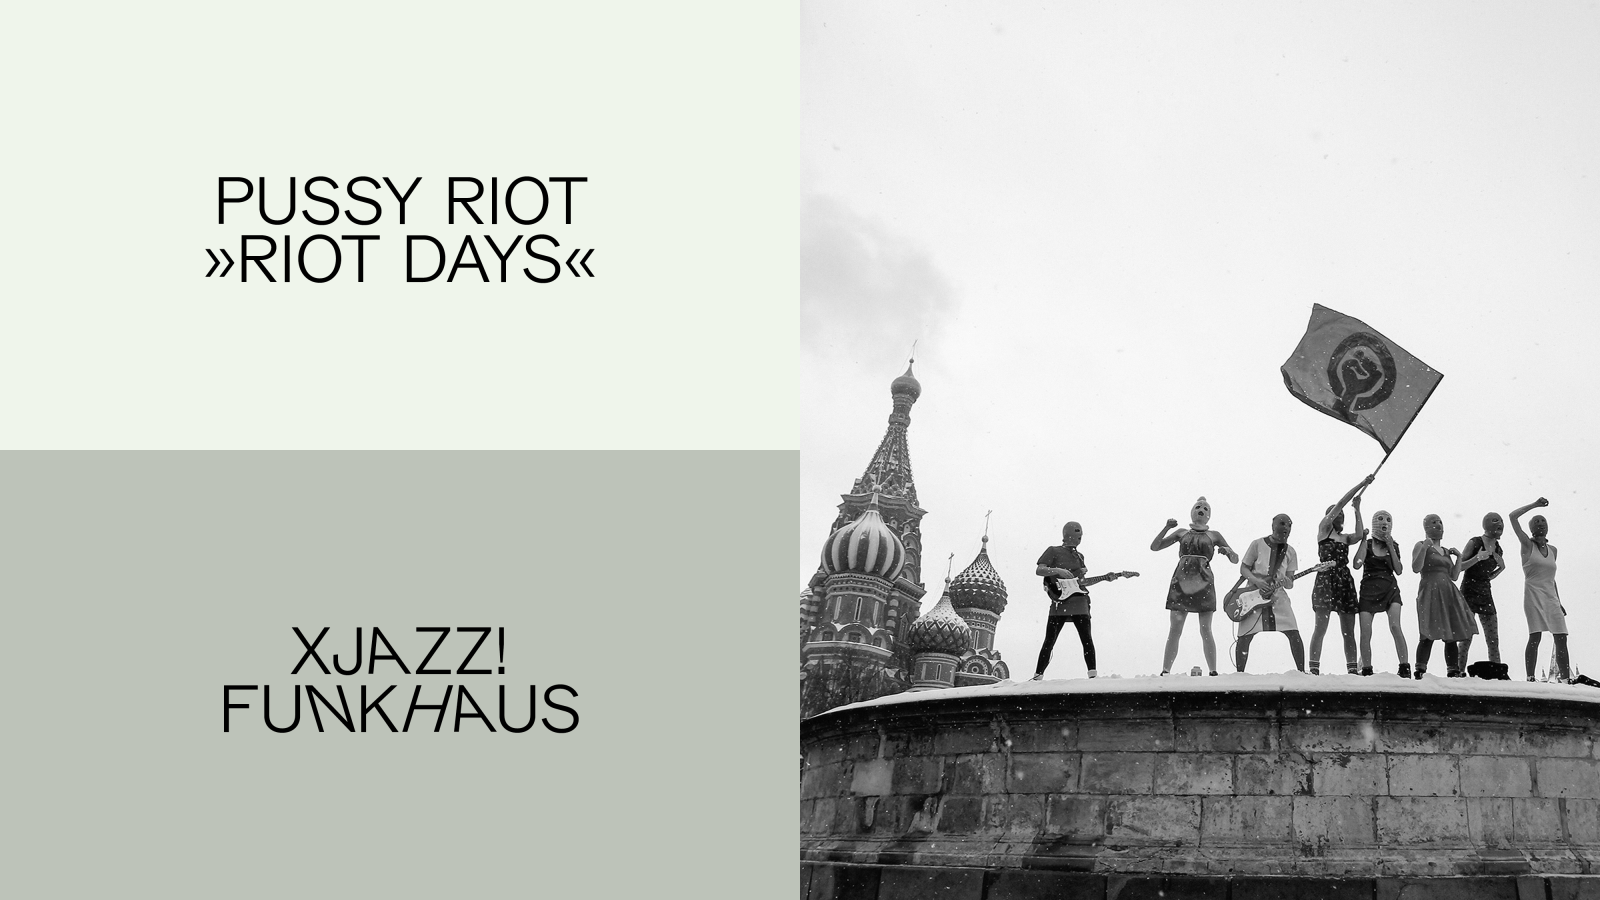 PUSSY RIOT "RIOT DAYS" - THIS THURSDAY 12TH OF MAY